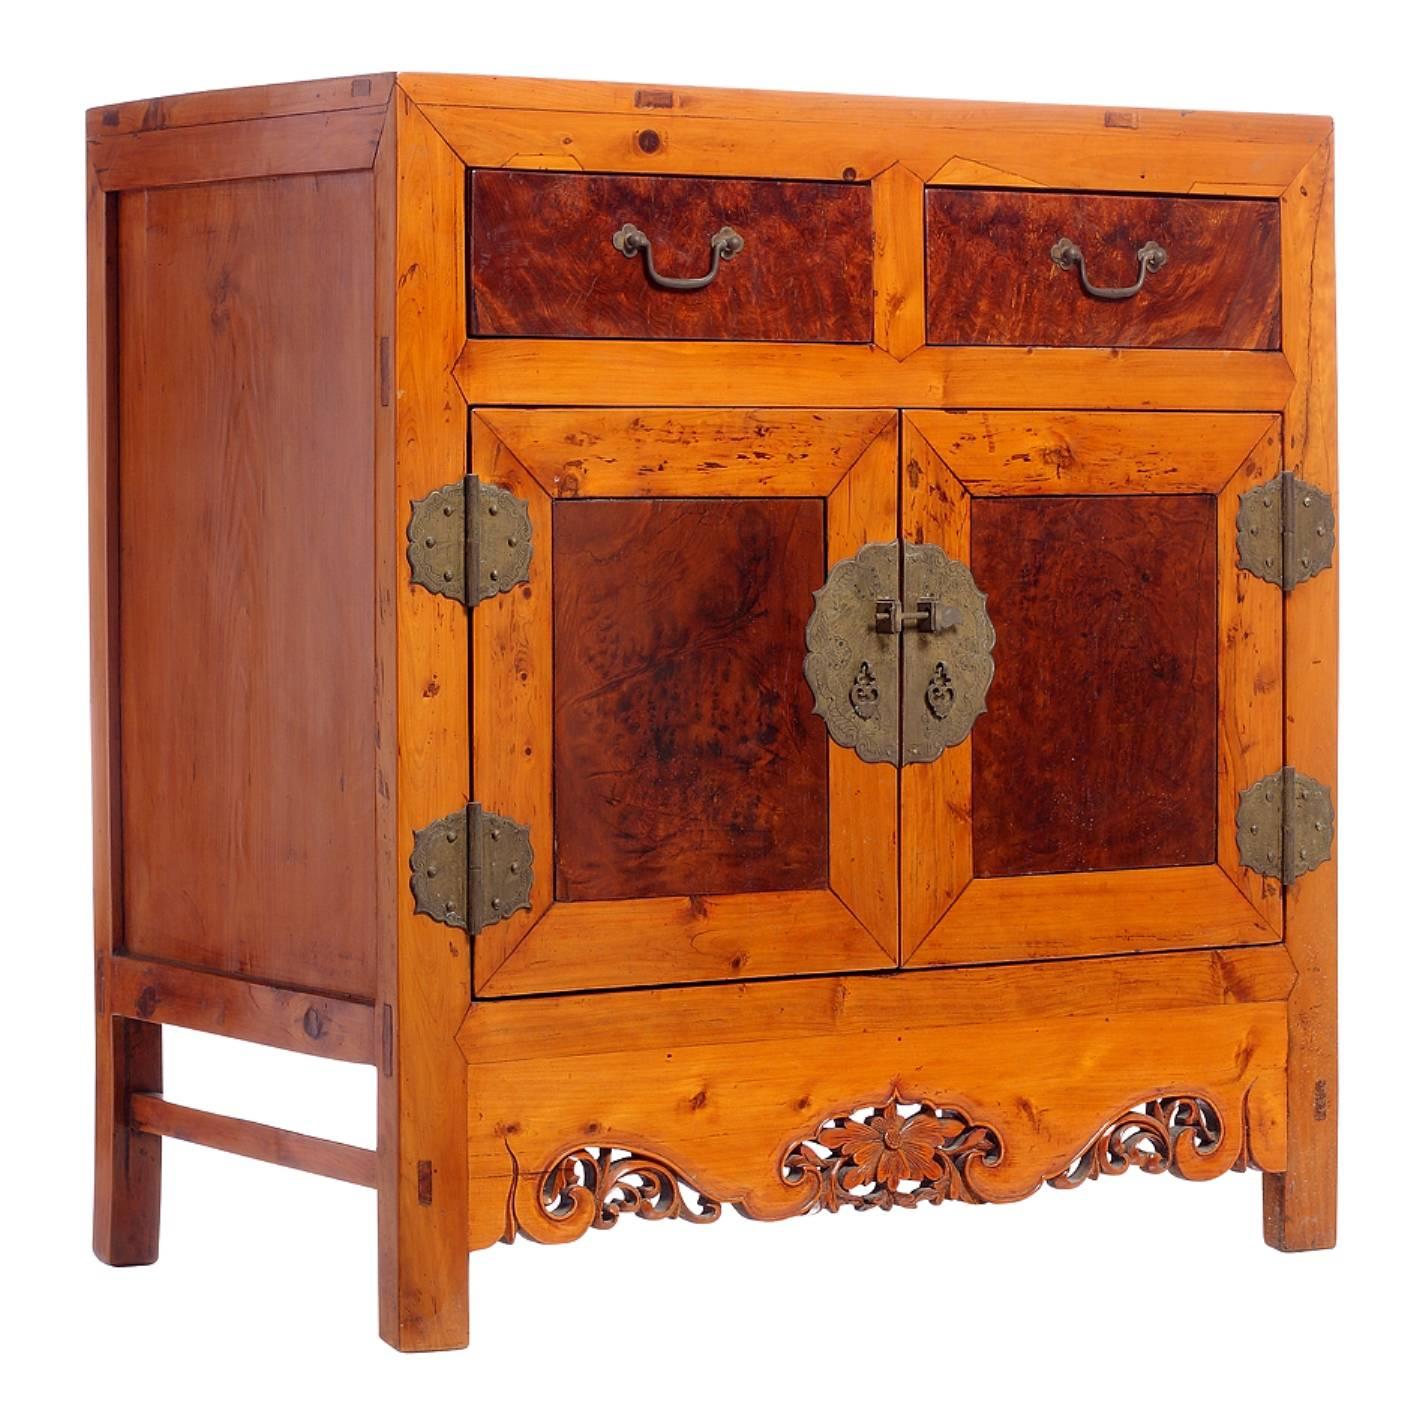 This Chinese side cabinet from the turn of the century (19th-20th century) features two drawers over two doors and is made of elm with burl wood panels on its front. The skirt is nicely adorned with pierced motifs made of a central flower and